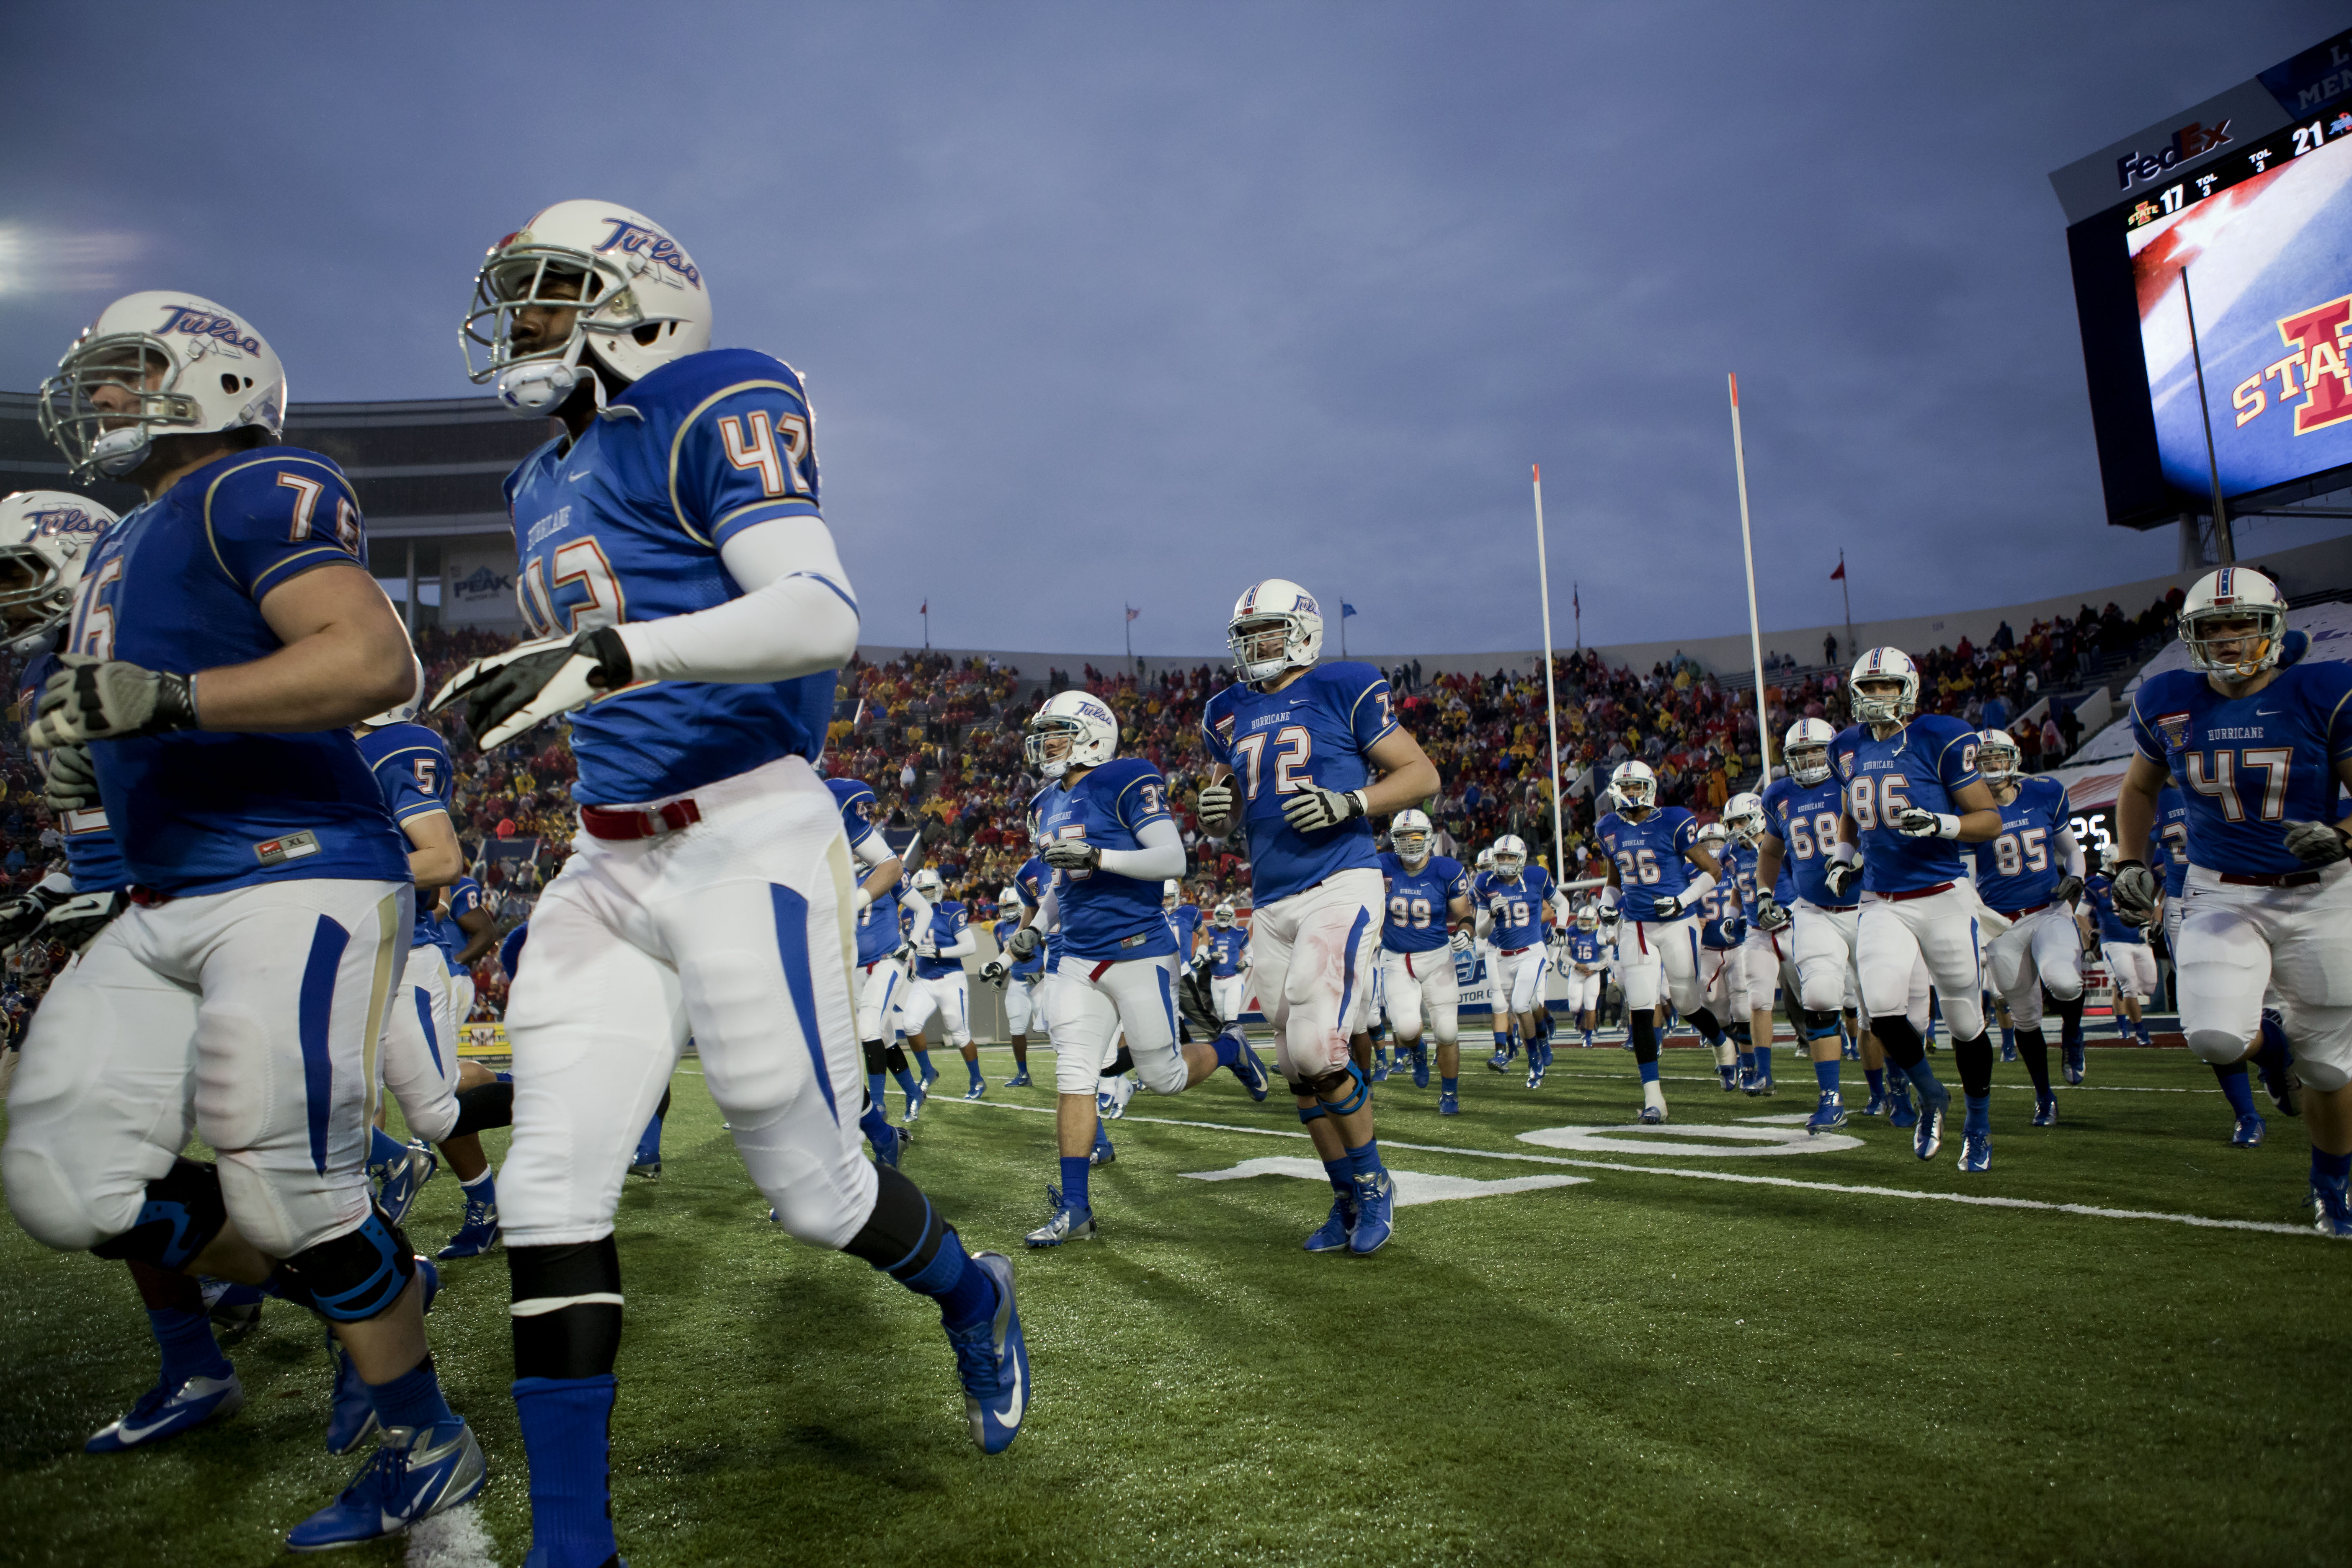 University of Tulsa Football Players run onto the field for the second